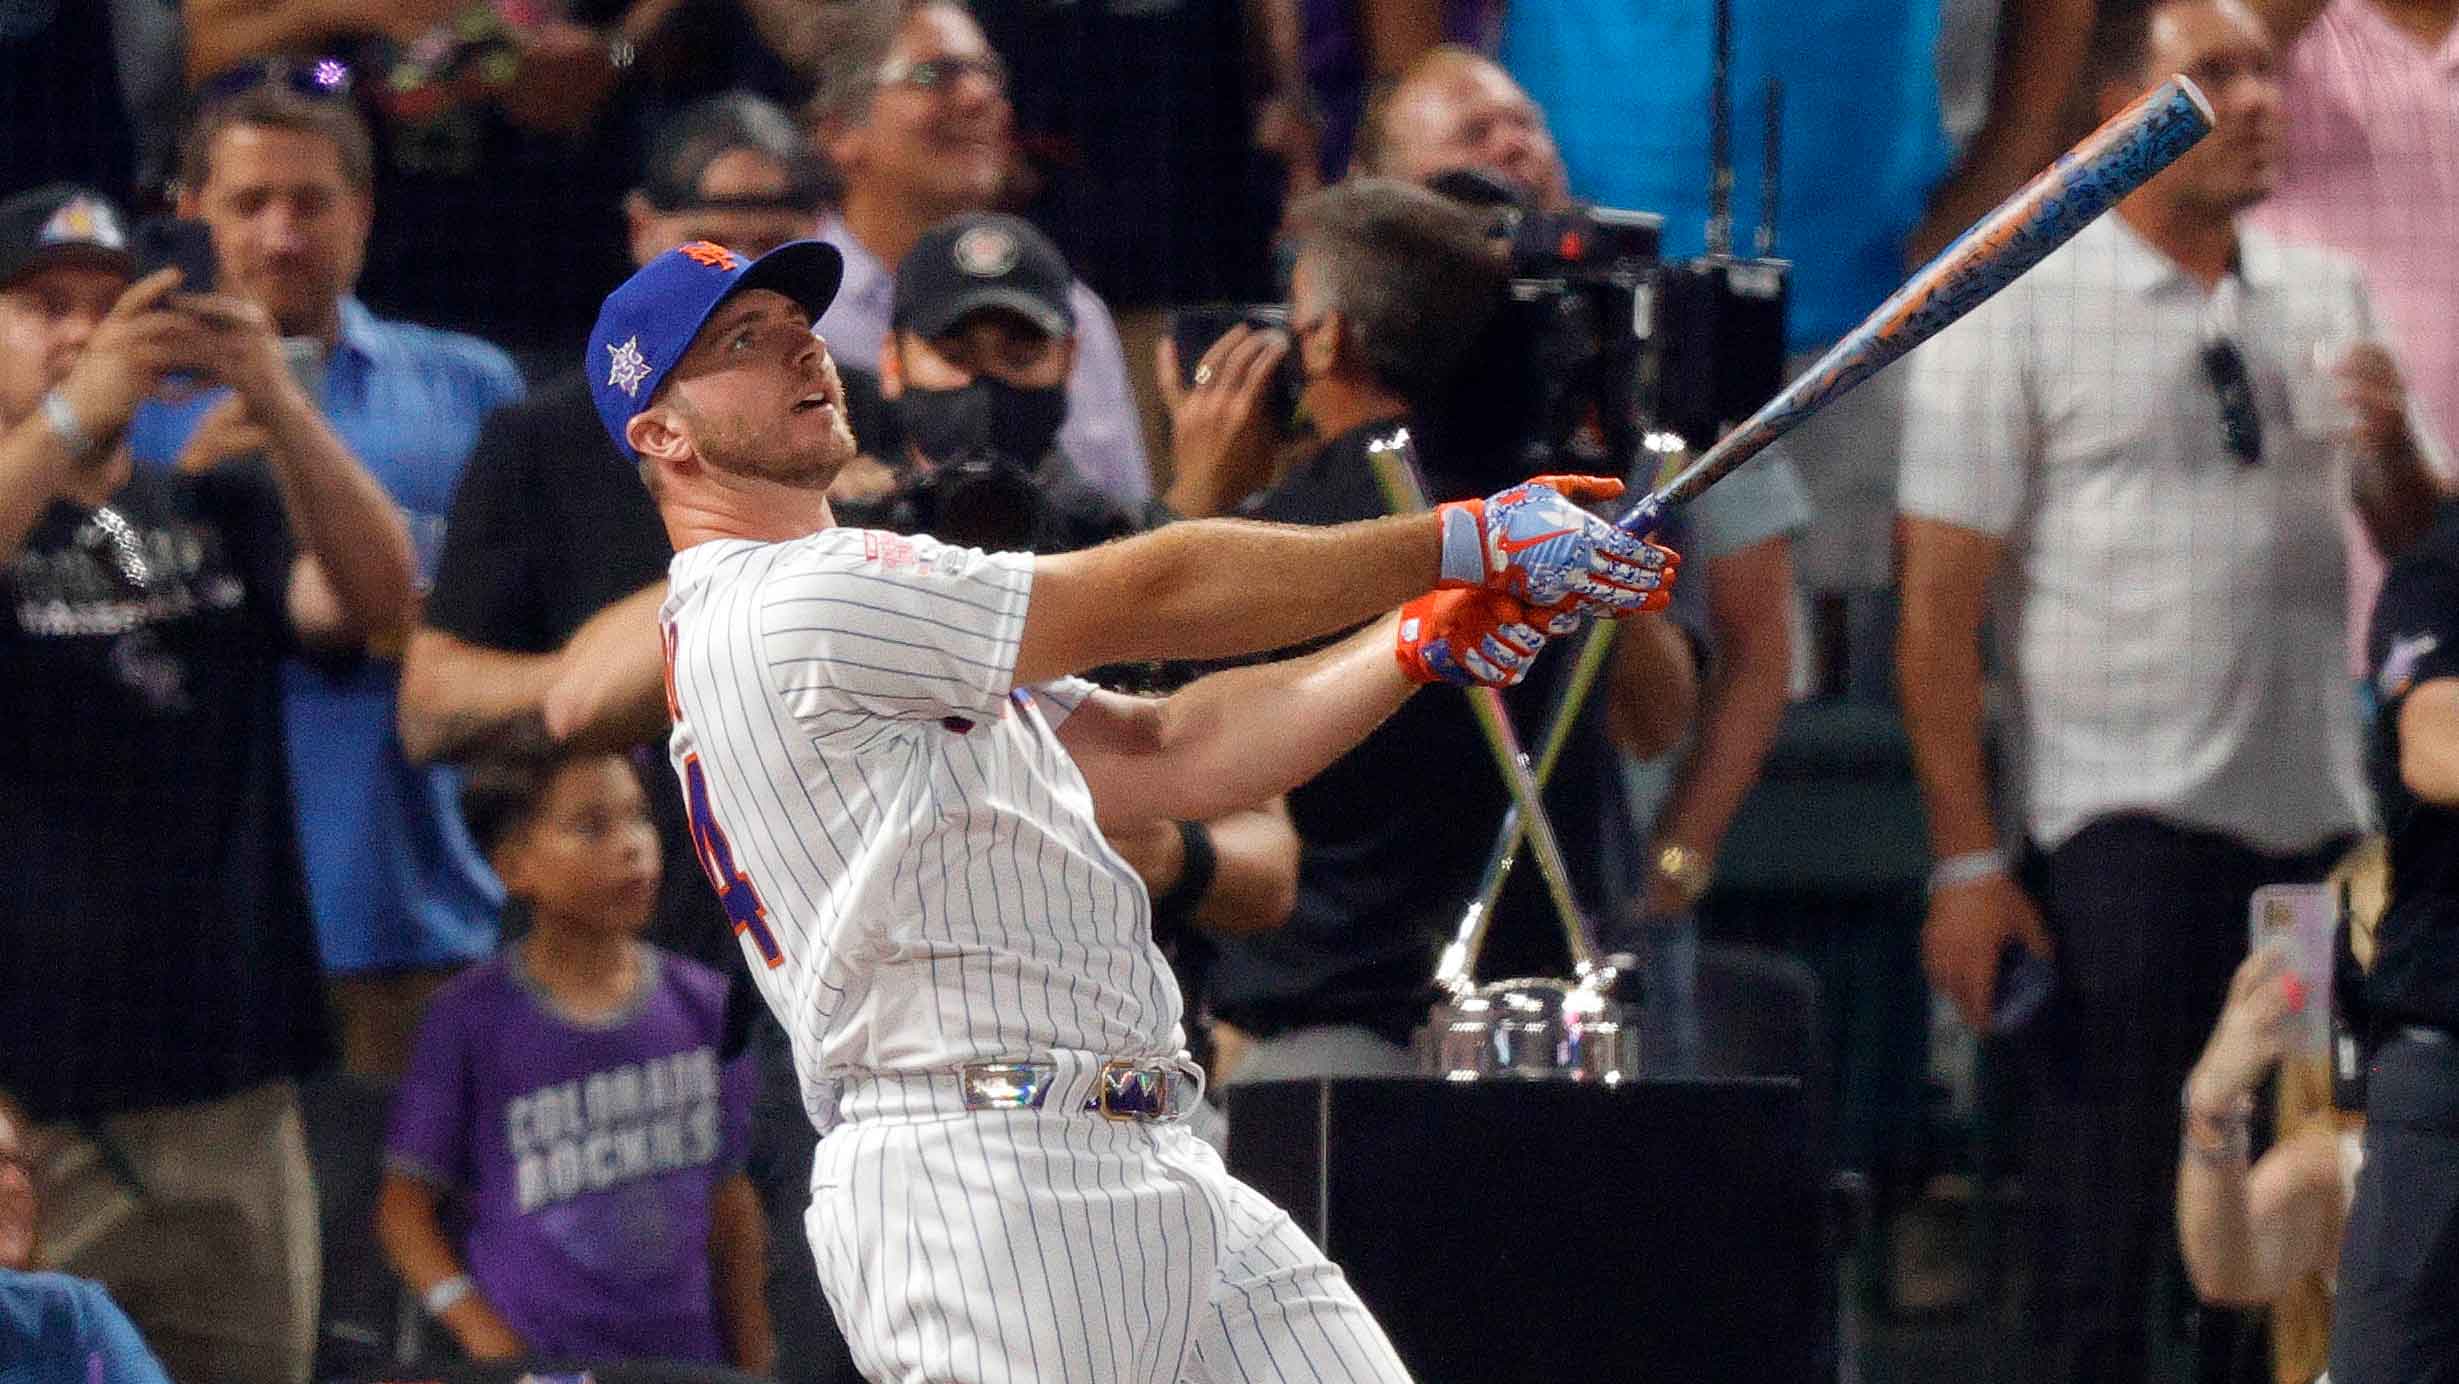 Home Run Derby Predictions: Pete Alonso, Kyle Schwarber, Juan Soto